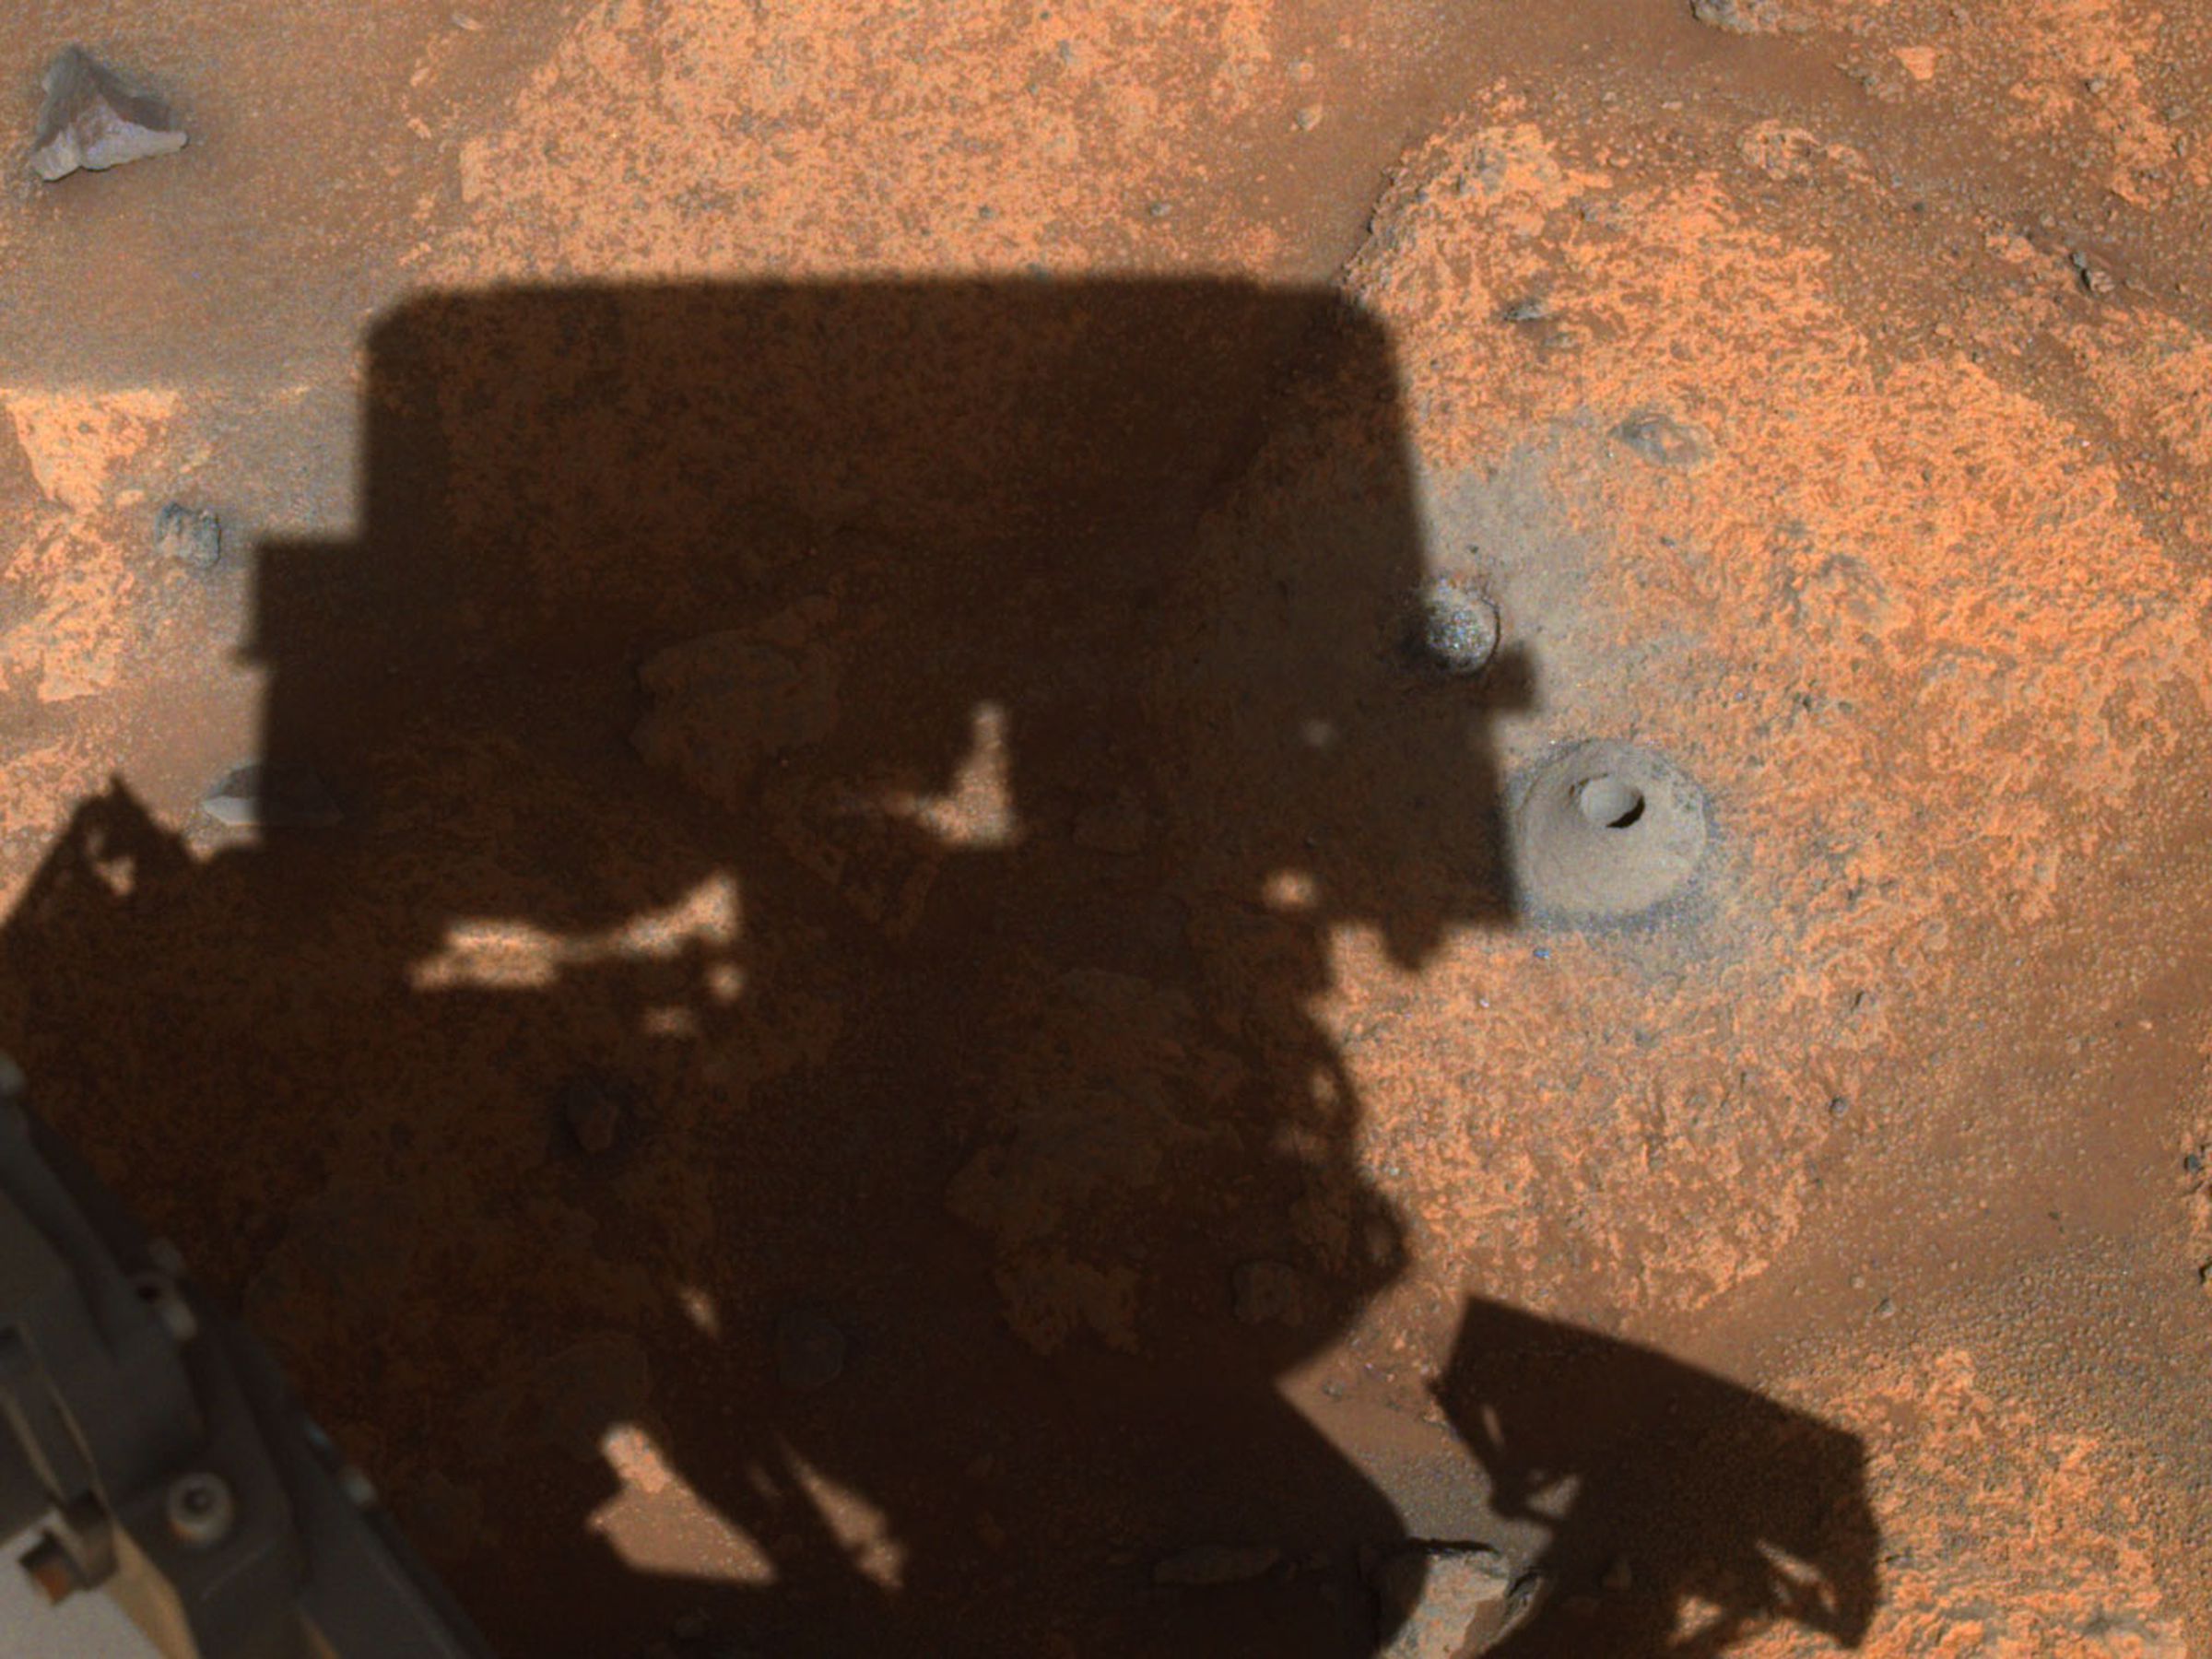 The hole Perseverance drilled on August 5th sitting to the right of the shadow of the rover’s turret.